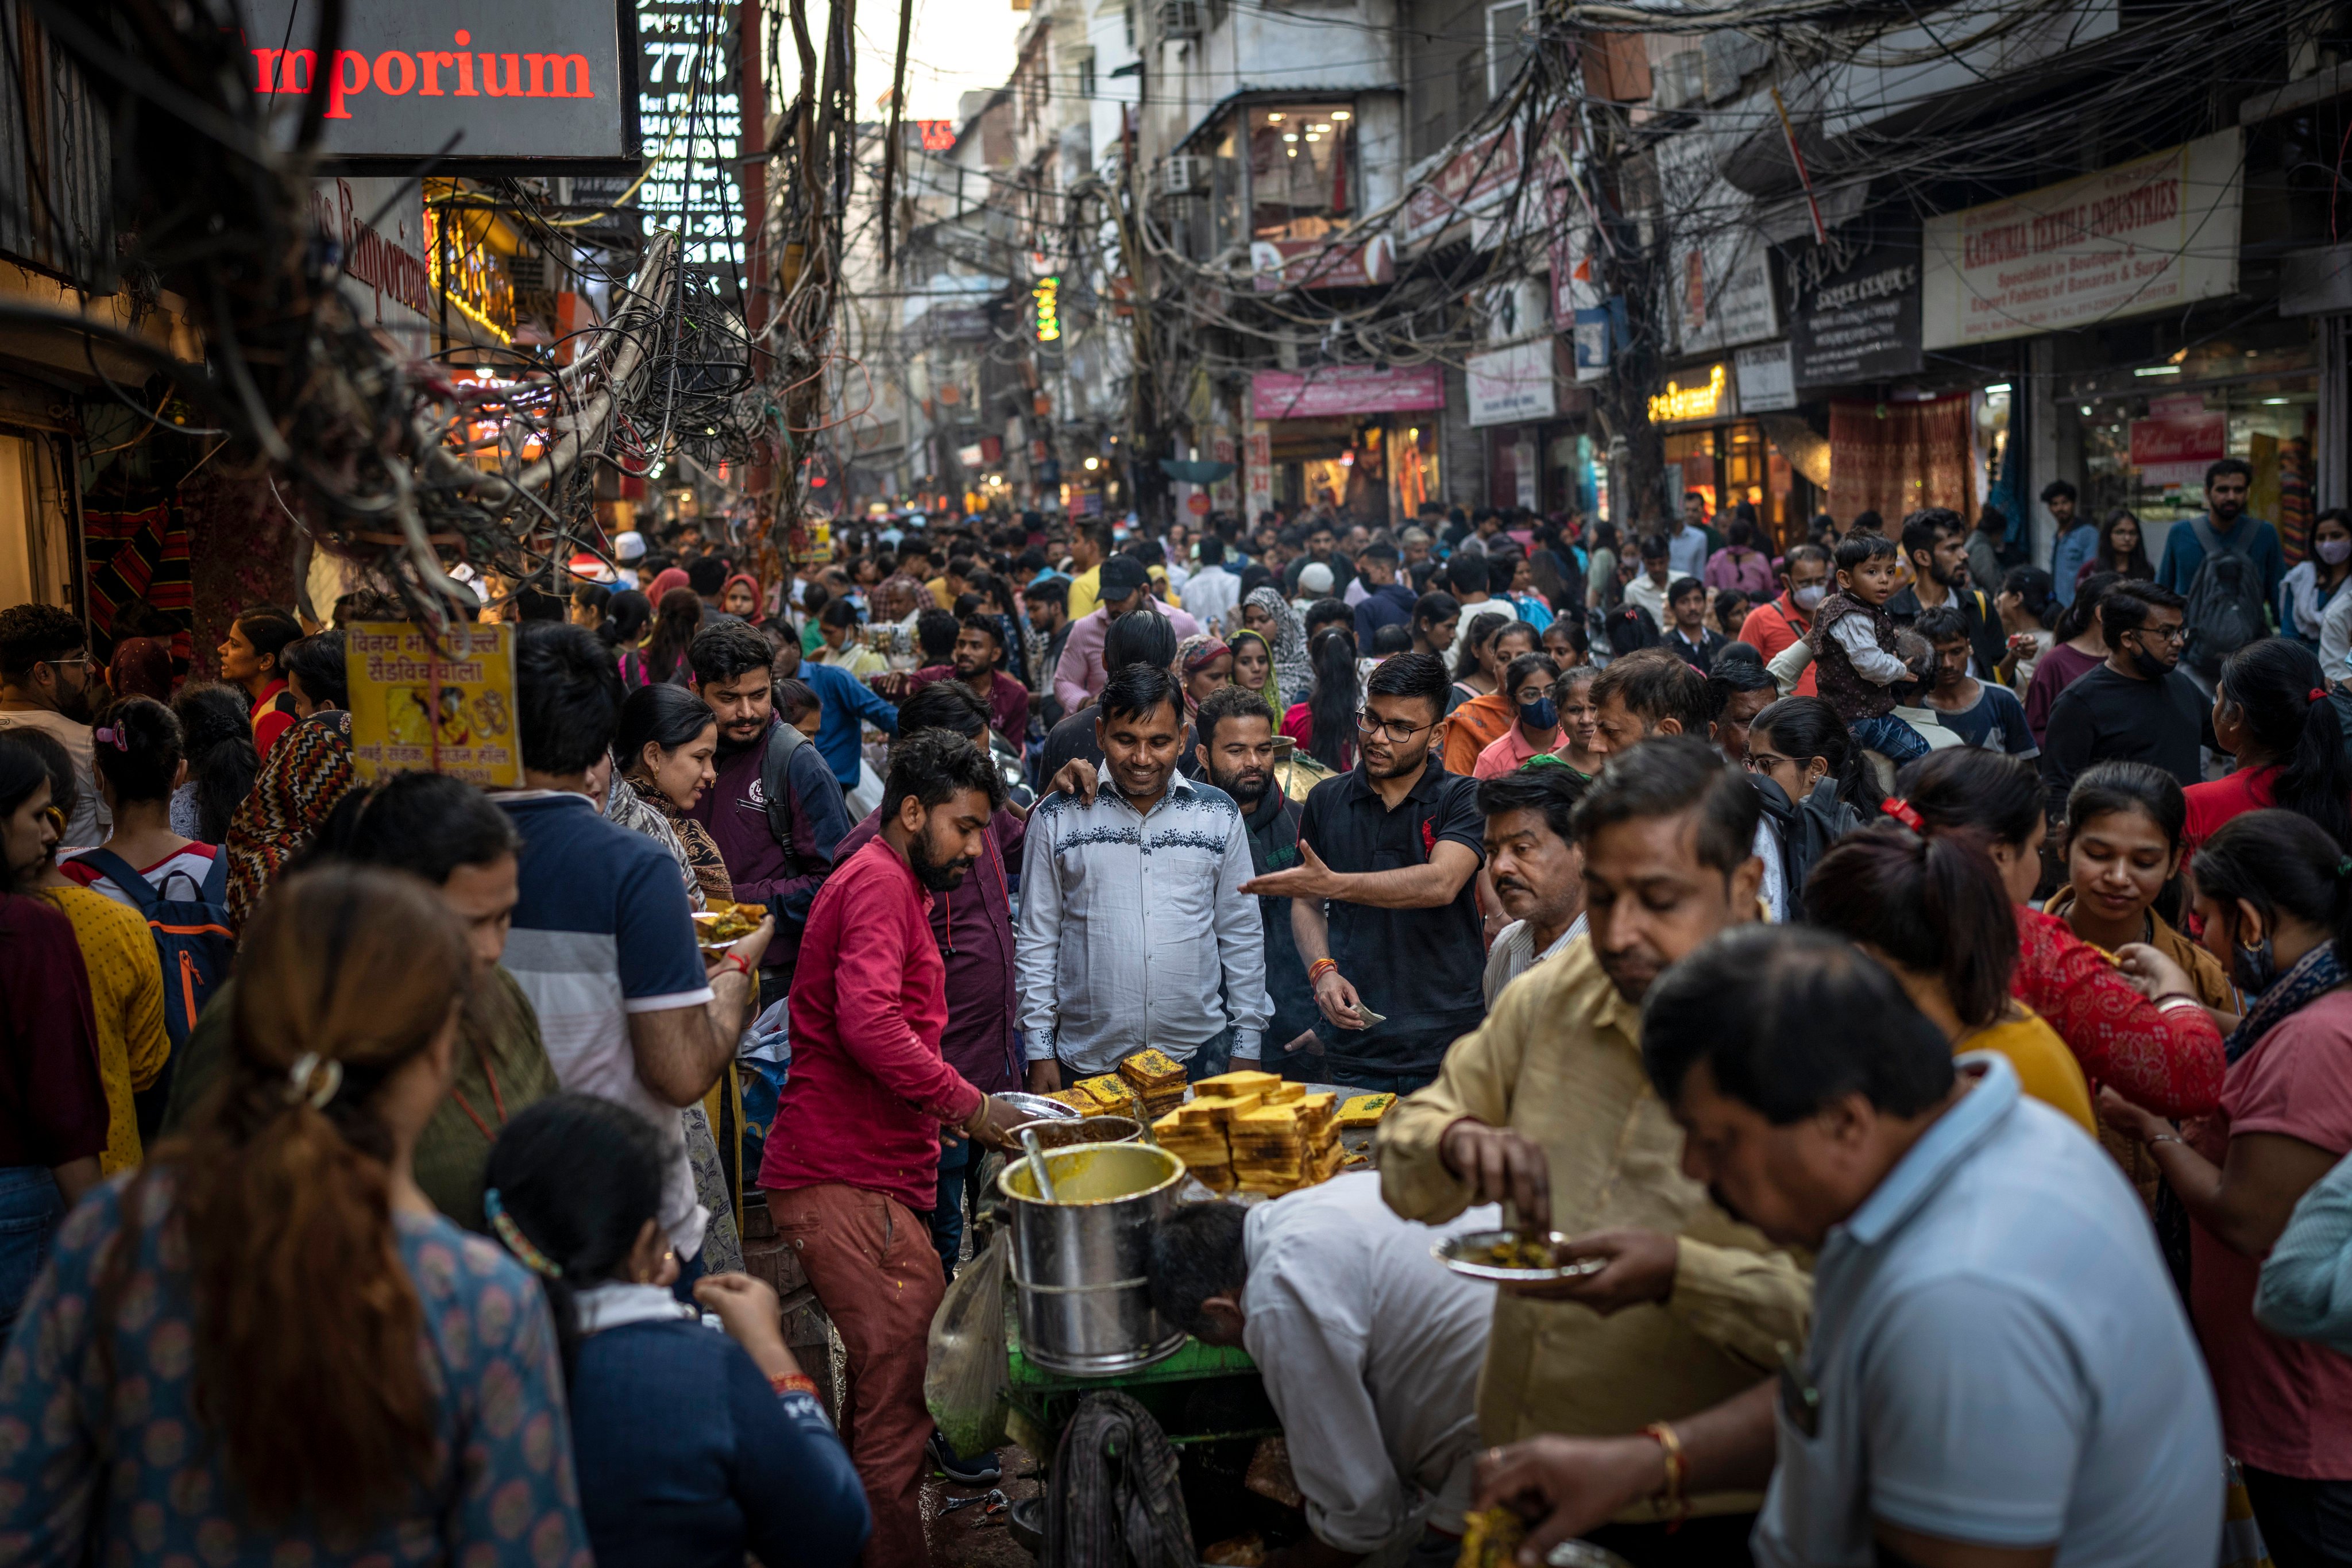 People eat street food as shoppers crowd a market in New Delhi on November 12. India is expected to take over from China as the world’s most populous country in the next few years. Photo: AP